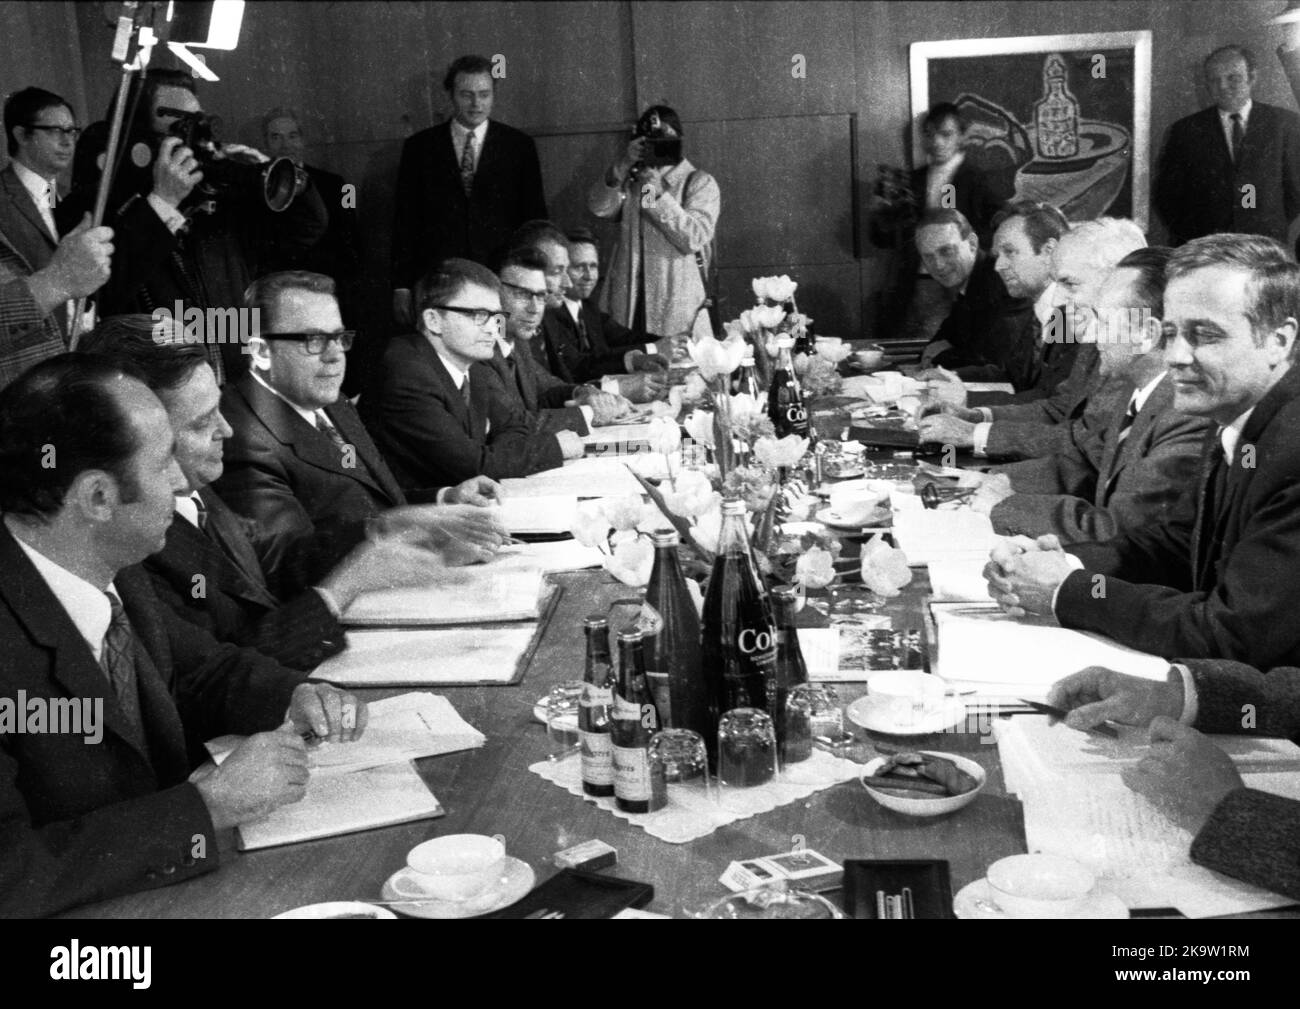 Delegations from the GDR with its leader Michael Kohl and from the Federal Republic with Egon Bahr as the Federal Republic's representative met in Stock Photo